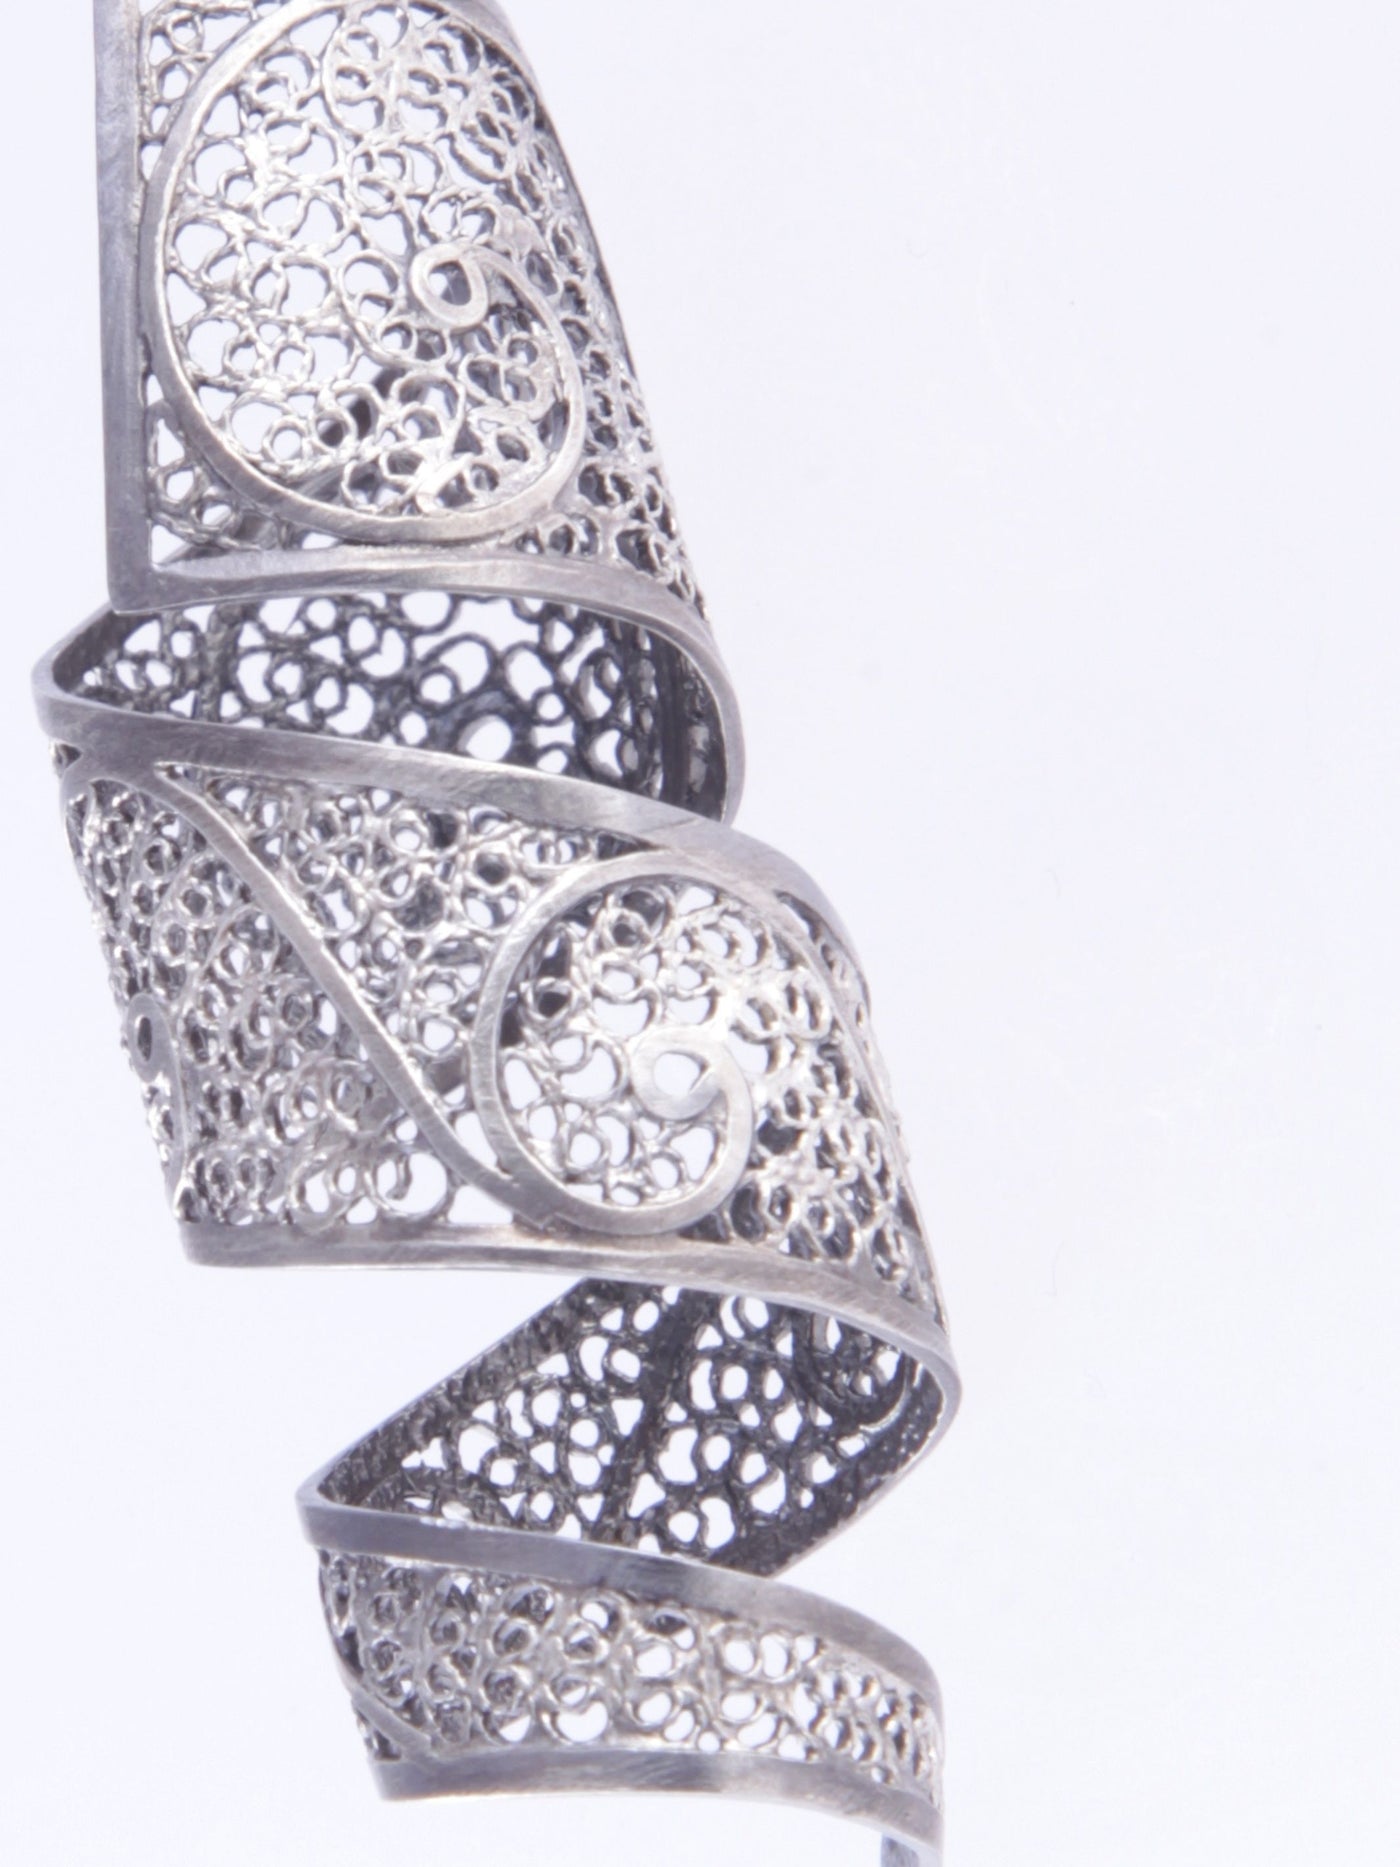 Filigree Silver Ring with Oxidised look - View 1